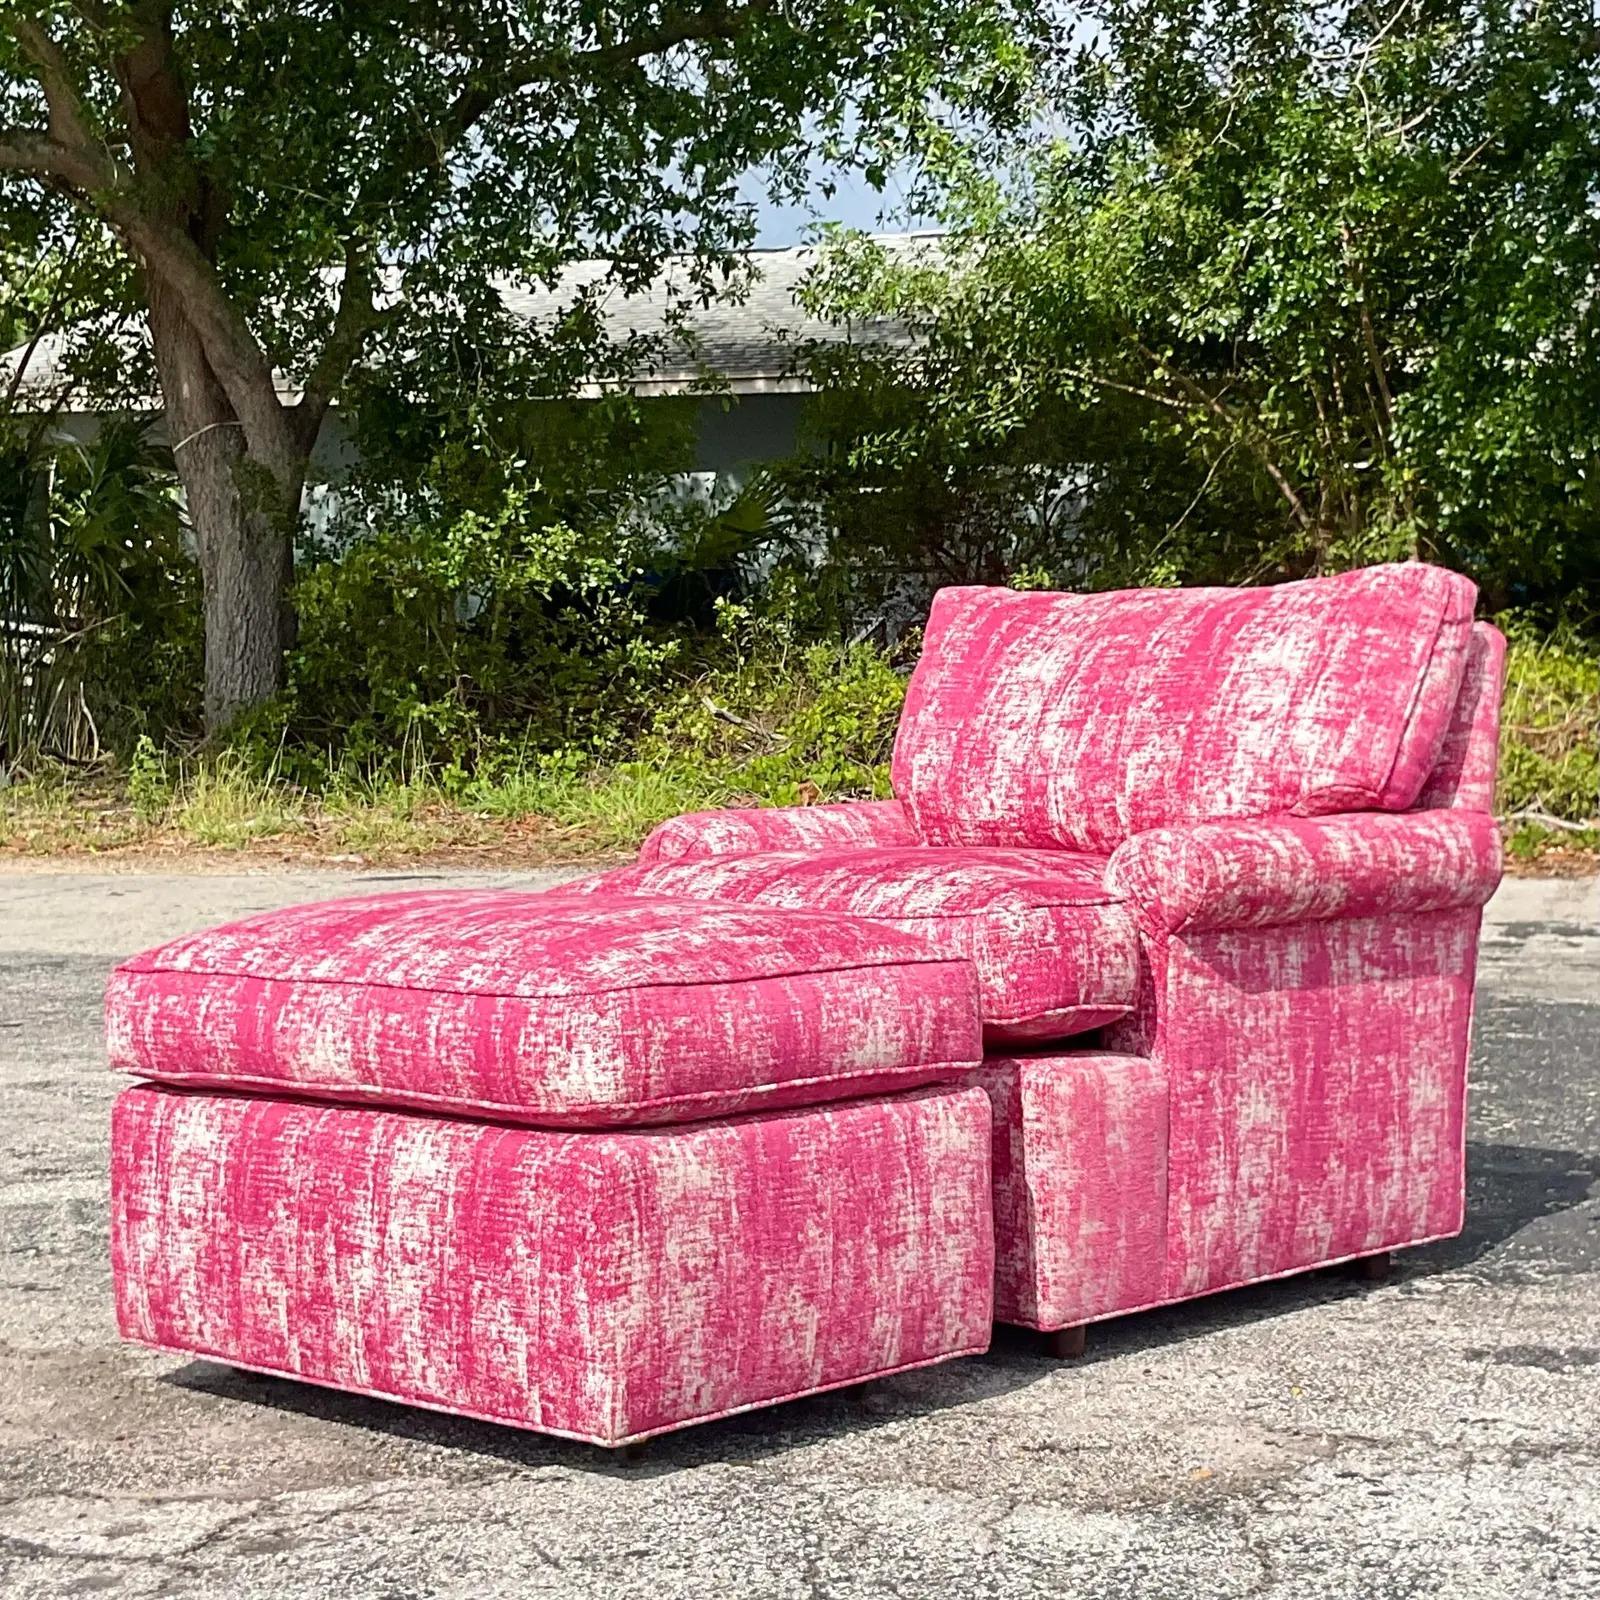 North American Vintage Boho Hot Pink Lounge Chair and Ottoman